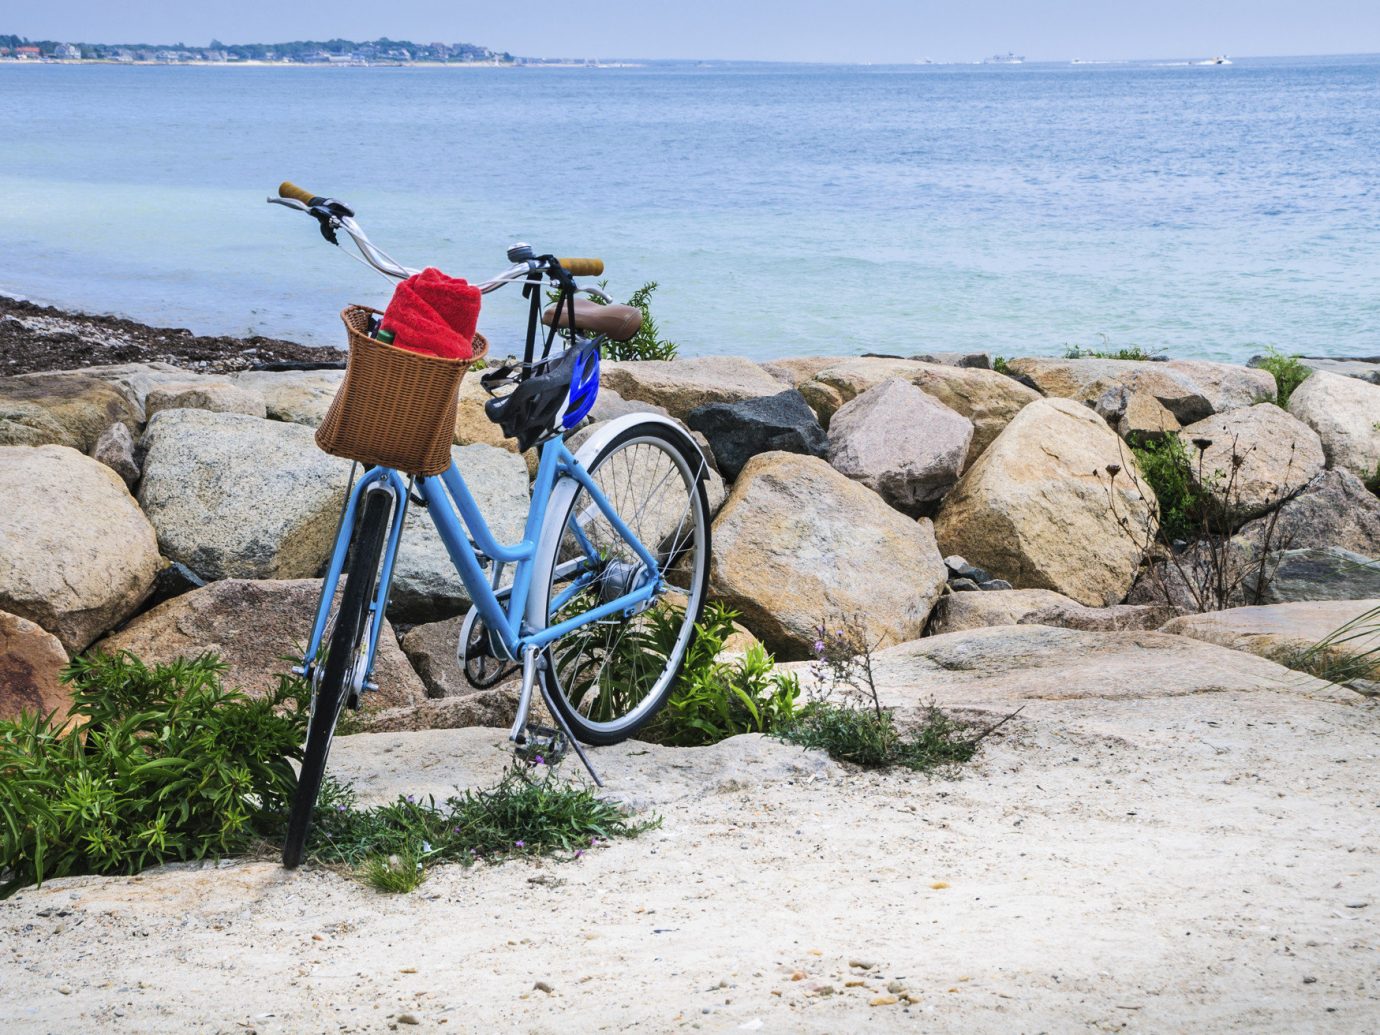 Trip Ideas outdoor rock ground water bicycle Beach Ocean rocky vehicle mountain bike Coast Sea vacation cycling parked mountain biking mountain sports equipment sand overlooking stone sandy shore